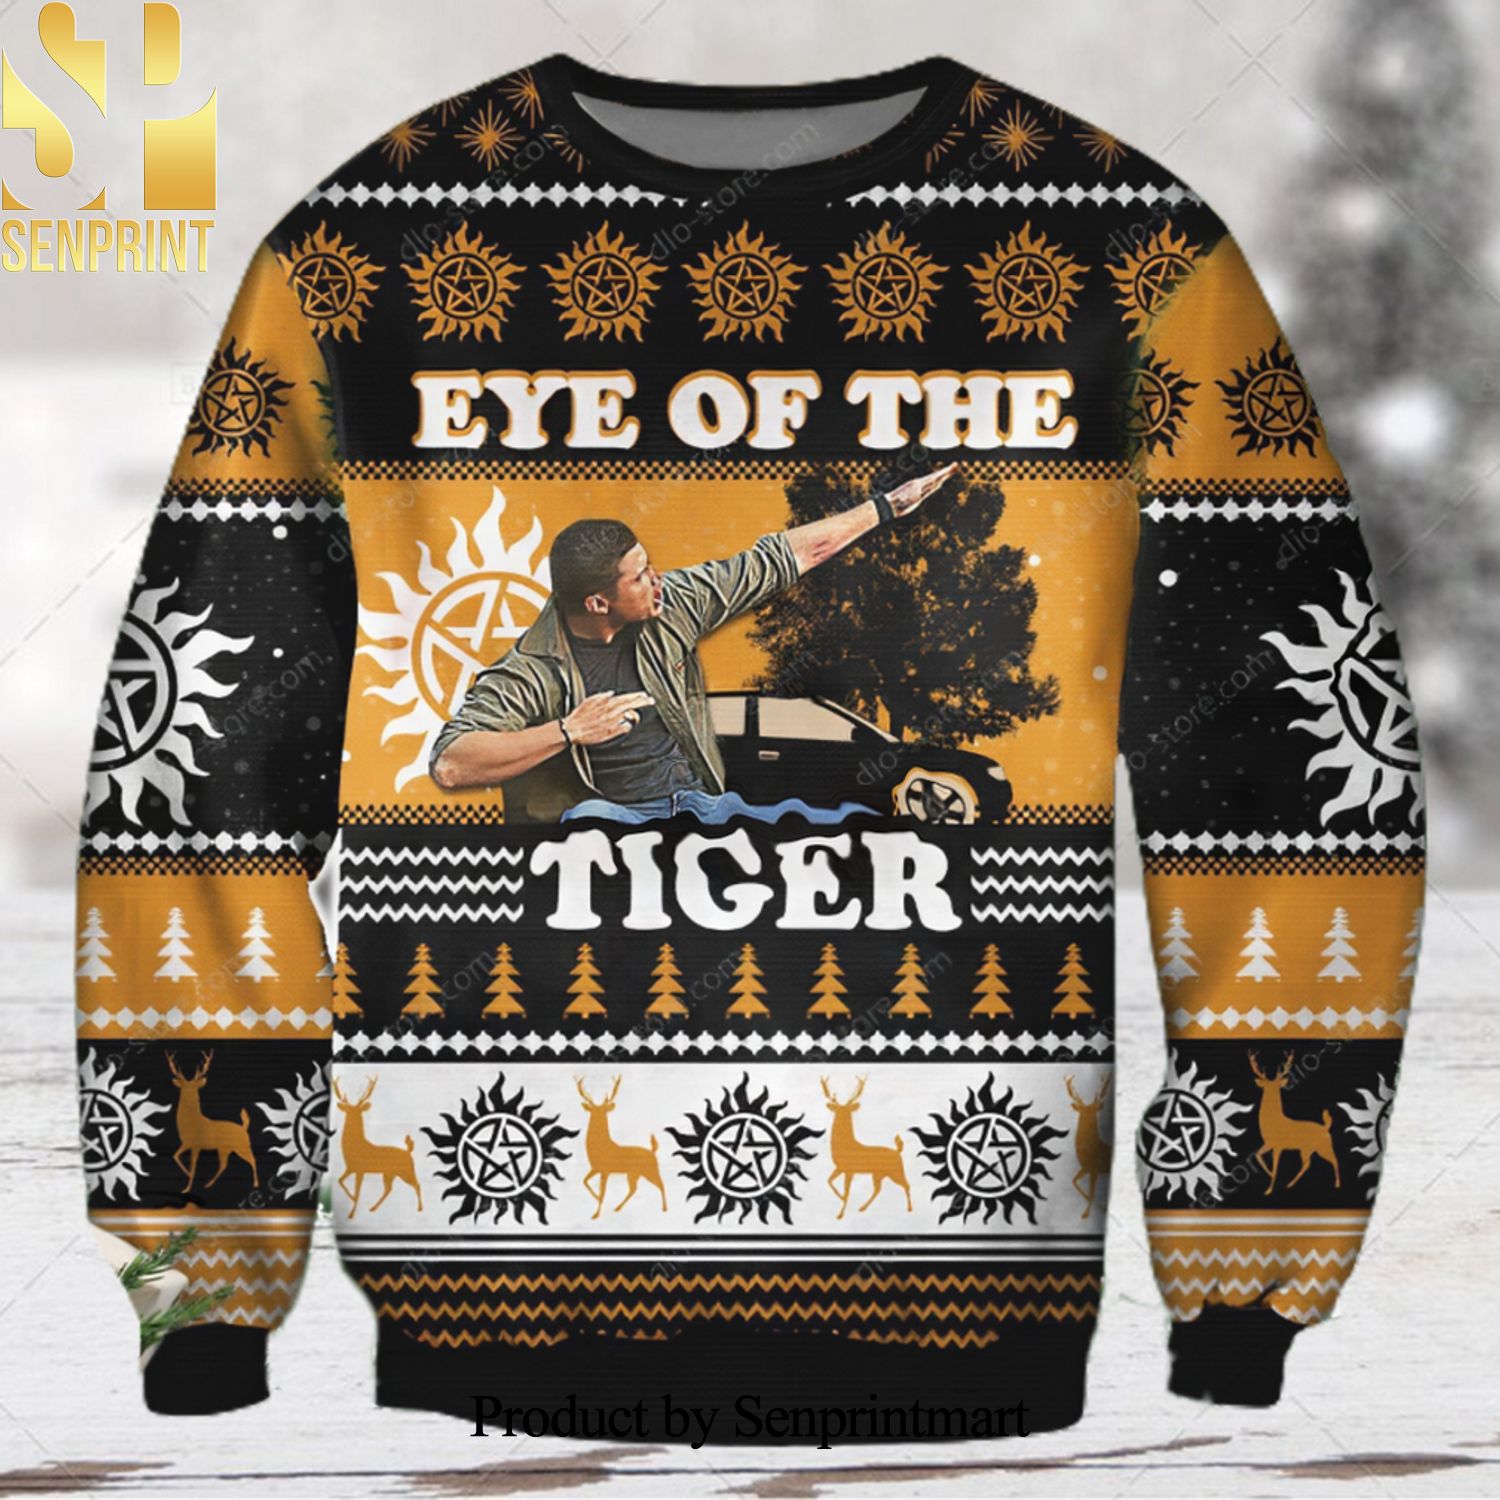 Deveraux Eye Of The Tiger Ugly Christmas Sweater